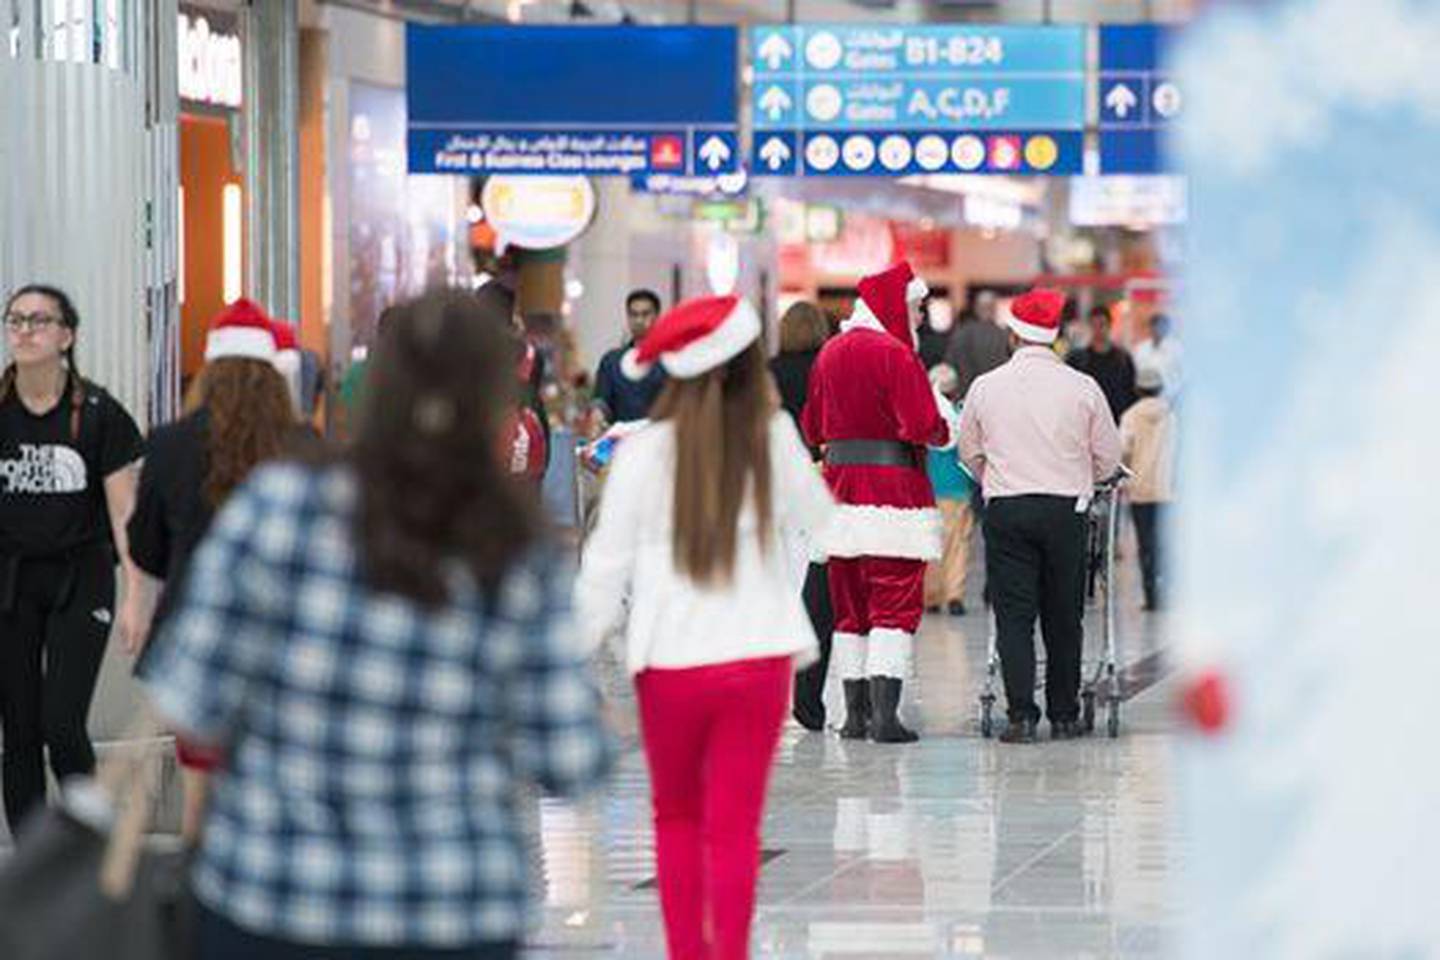 Get in the festive spirit at DXB this holiday season. Courtesy DXB